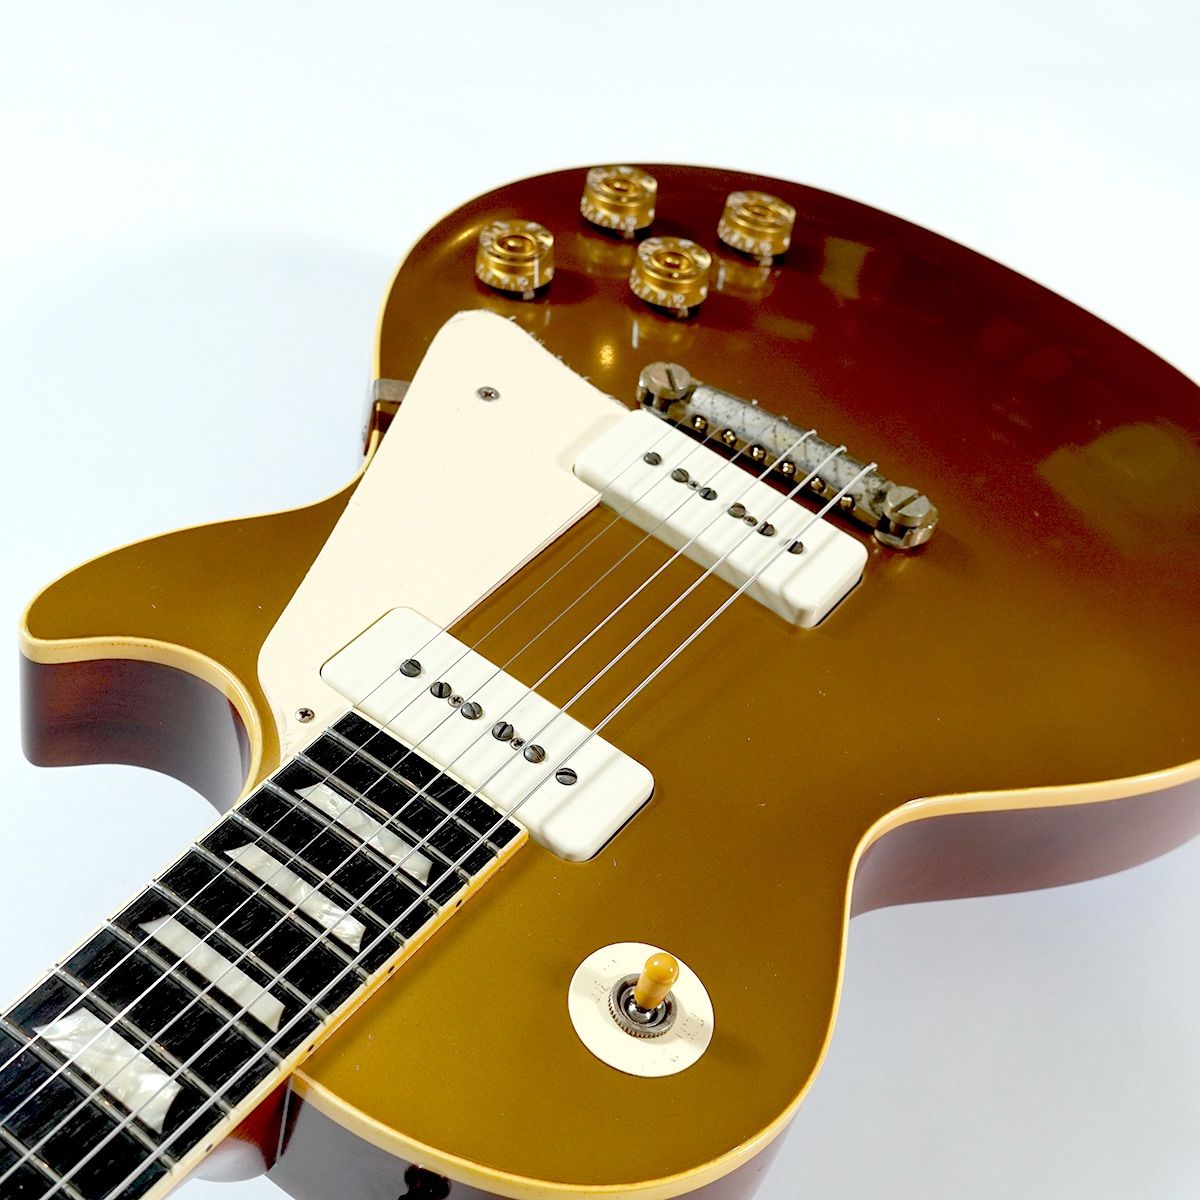 g7 Special / g7-LP54 Gold Top-4